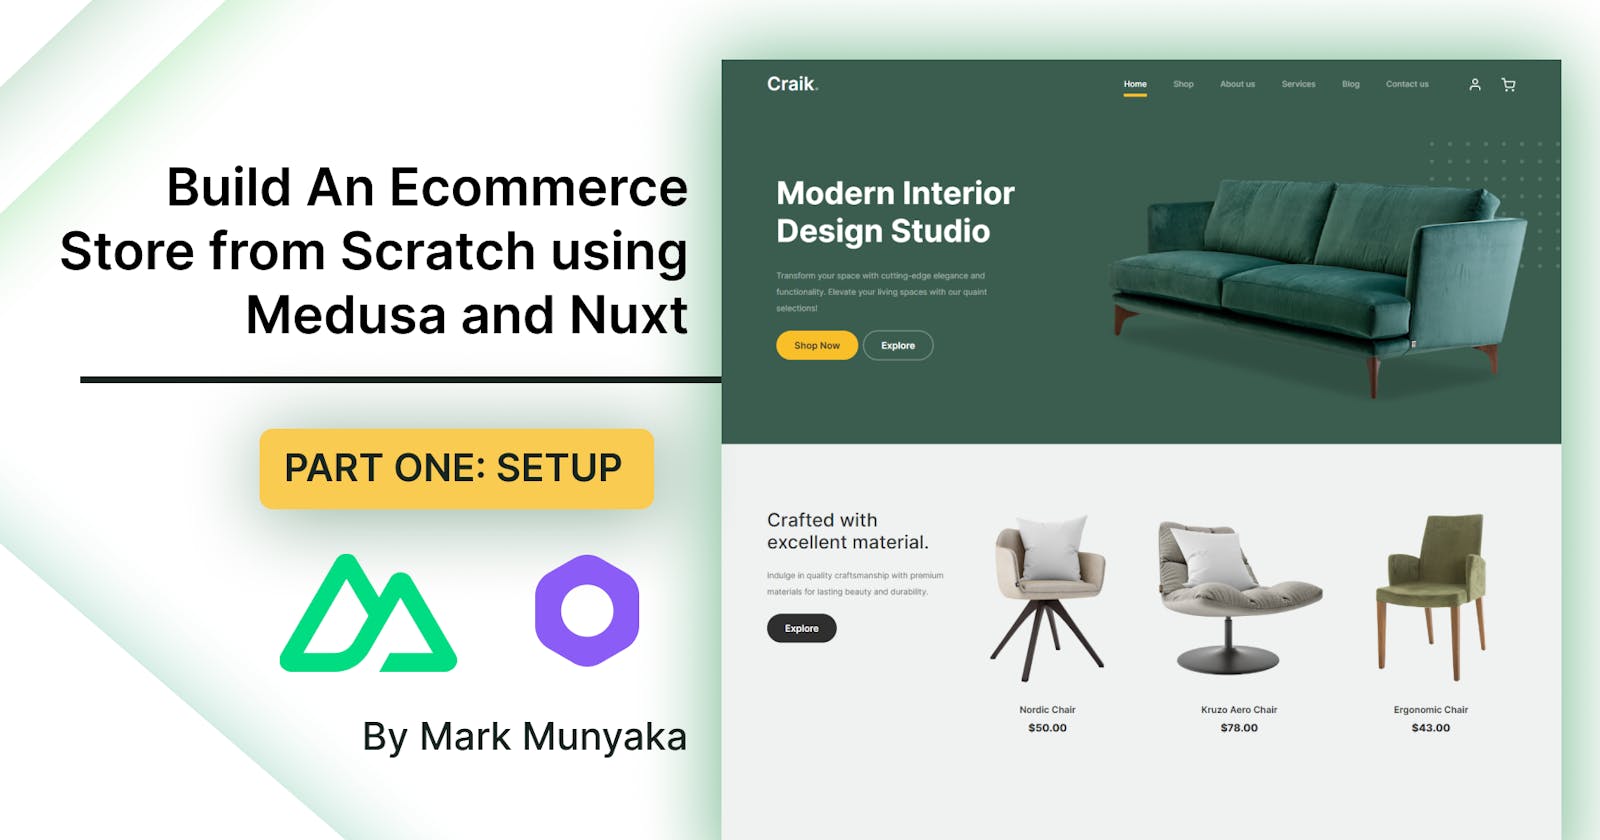 Build An Ecommerce Store from Scratch using Medusa and Nuxt